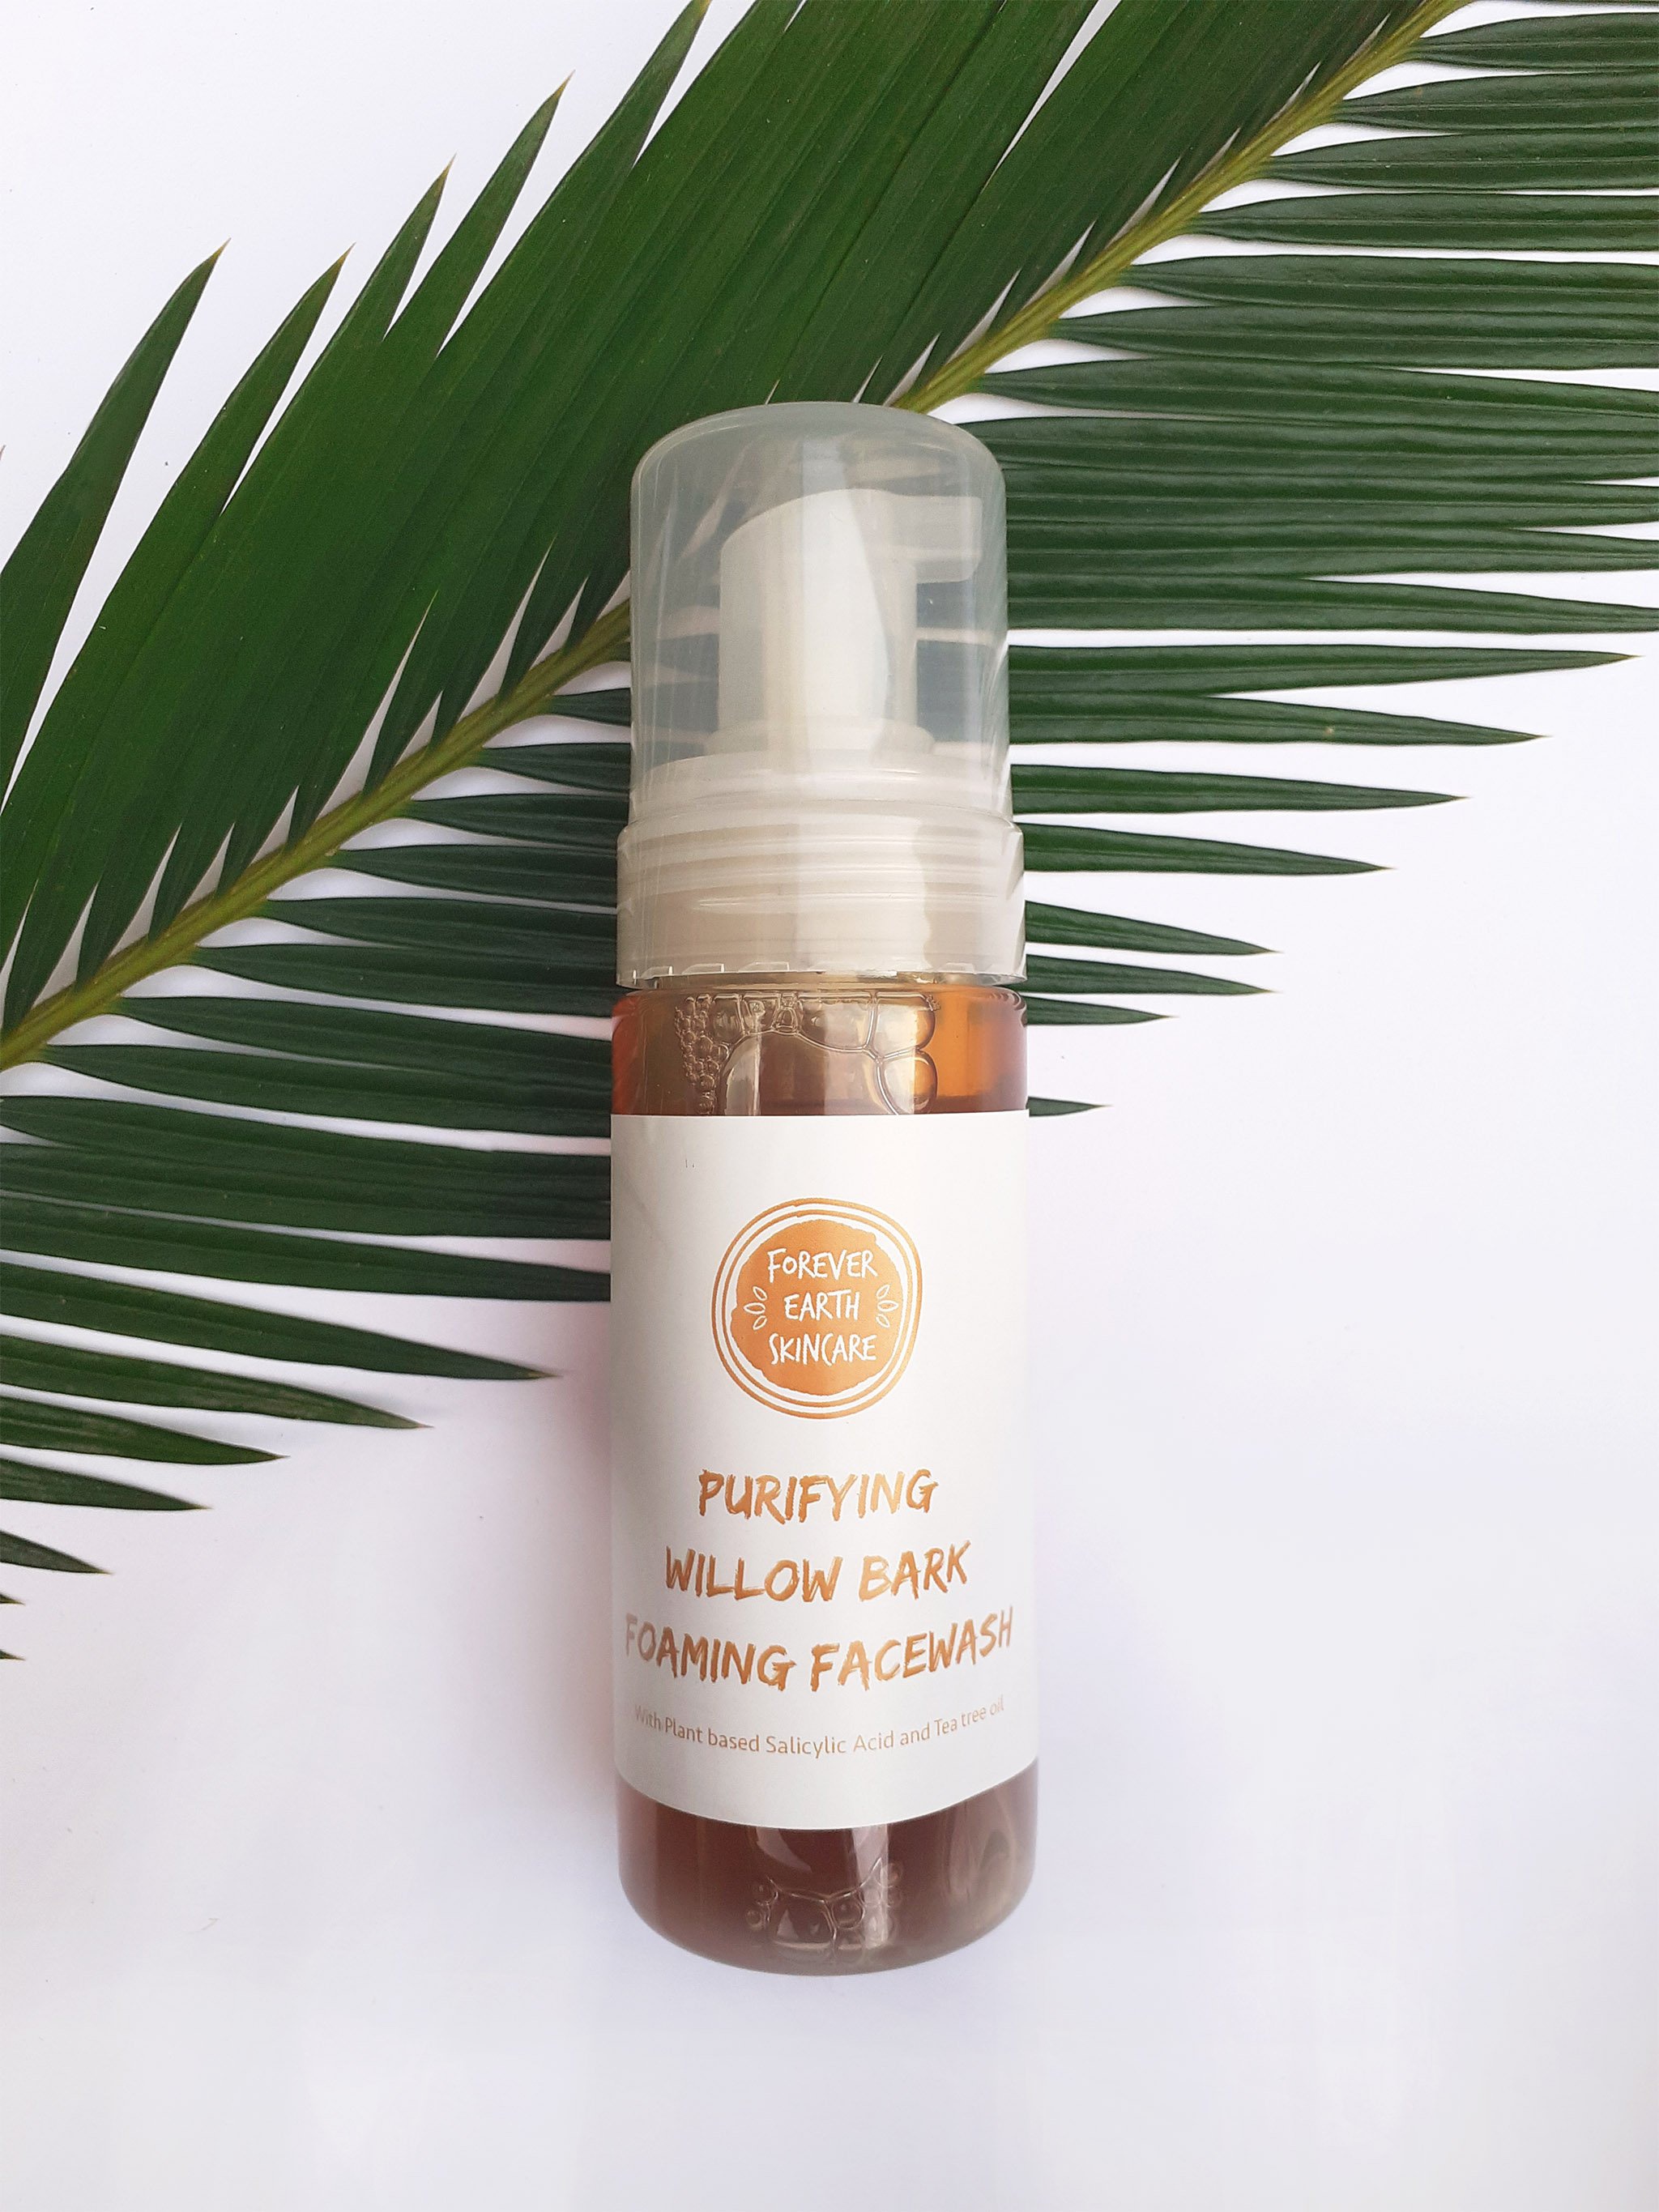 Forever earth Purifying Willow Bark Foaming Facewash